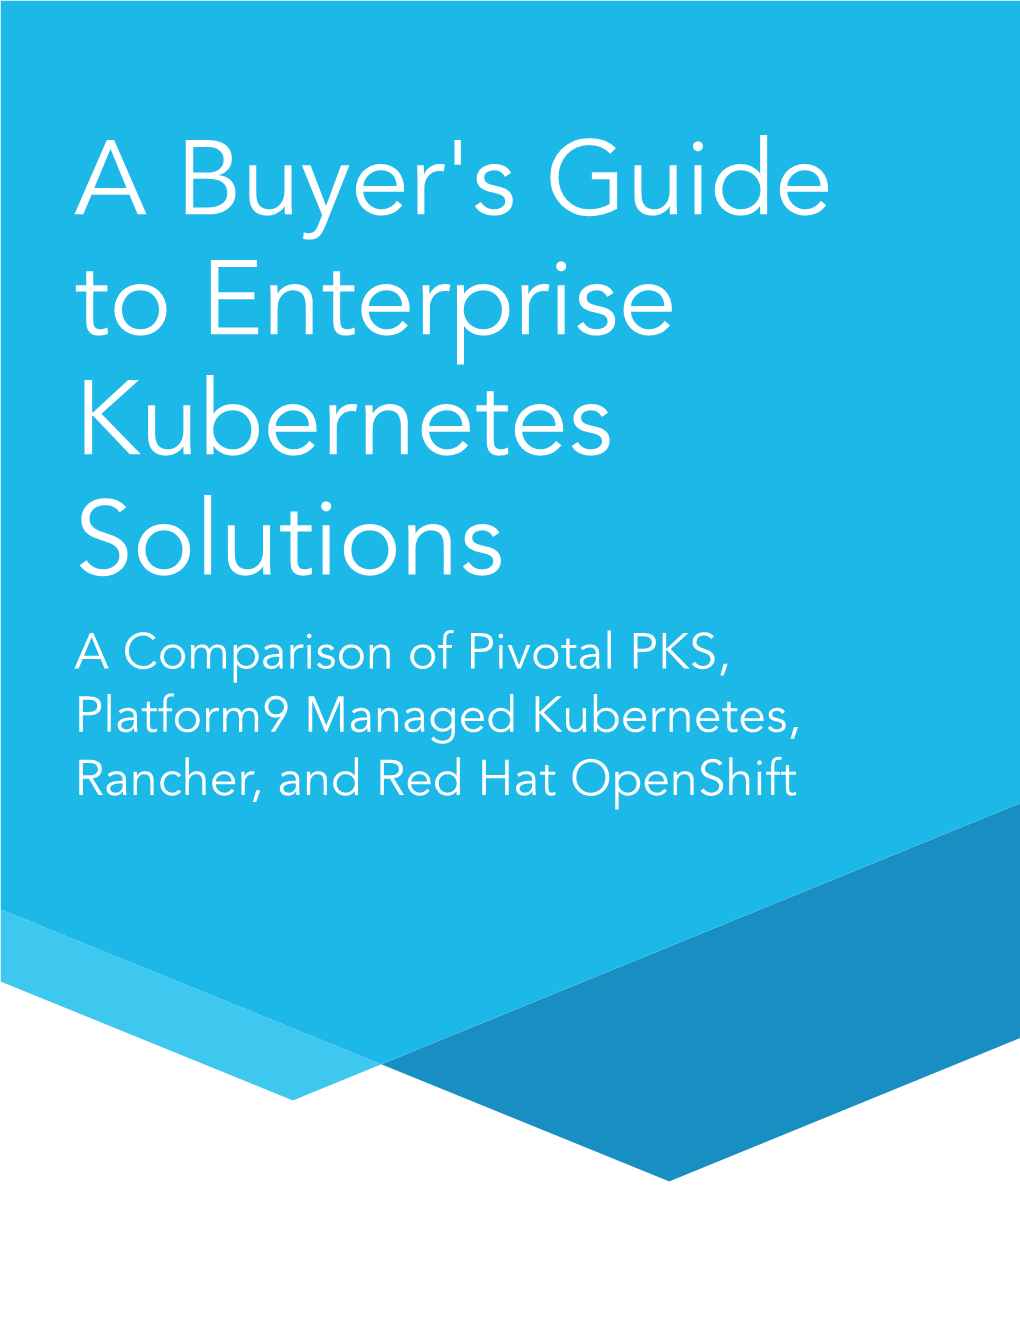 A Buyer's Guide to Enterprise Kubernetes Solutions